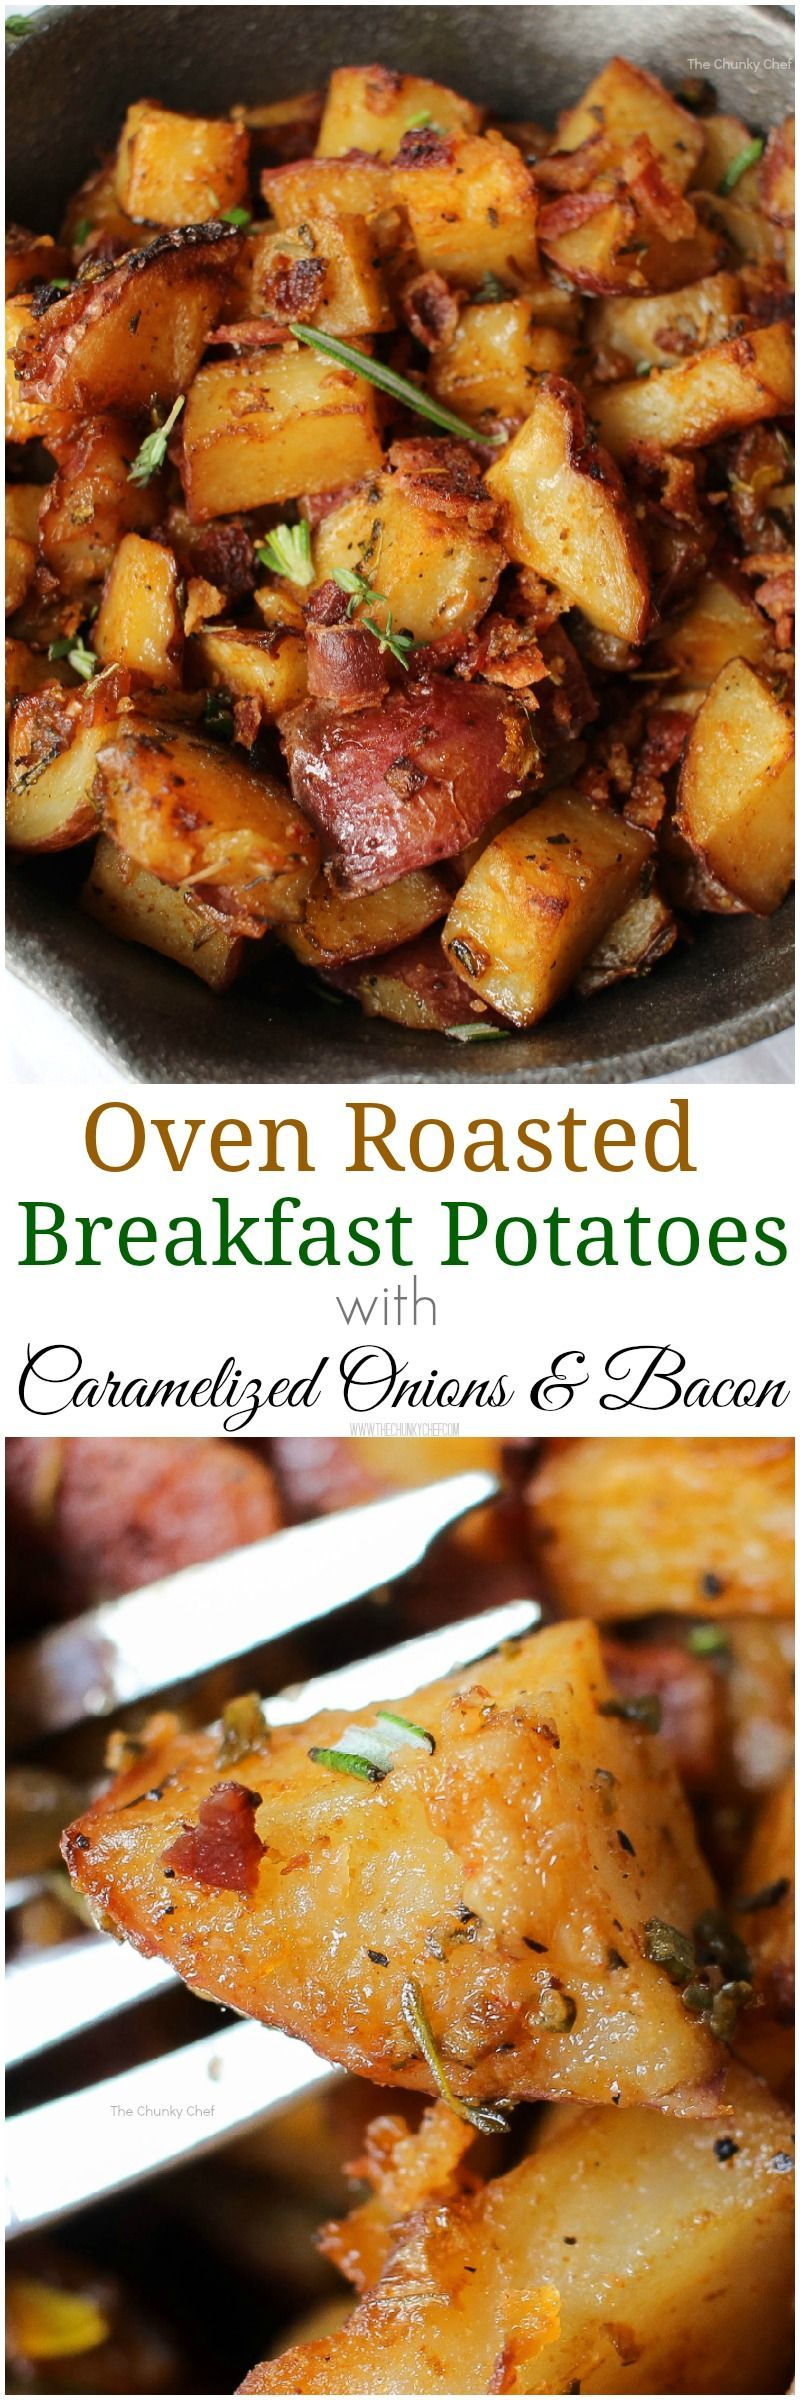 Oven Roasted Breakfast Potatoes – Perfectly seasoned and roasted red-skin potatoes topped with caramelized onions, crispy bacon